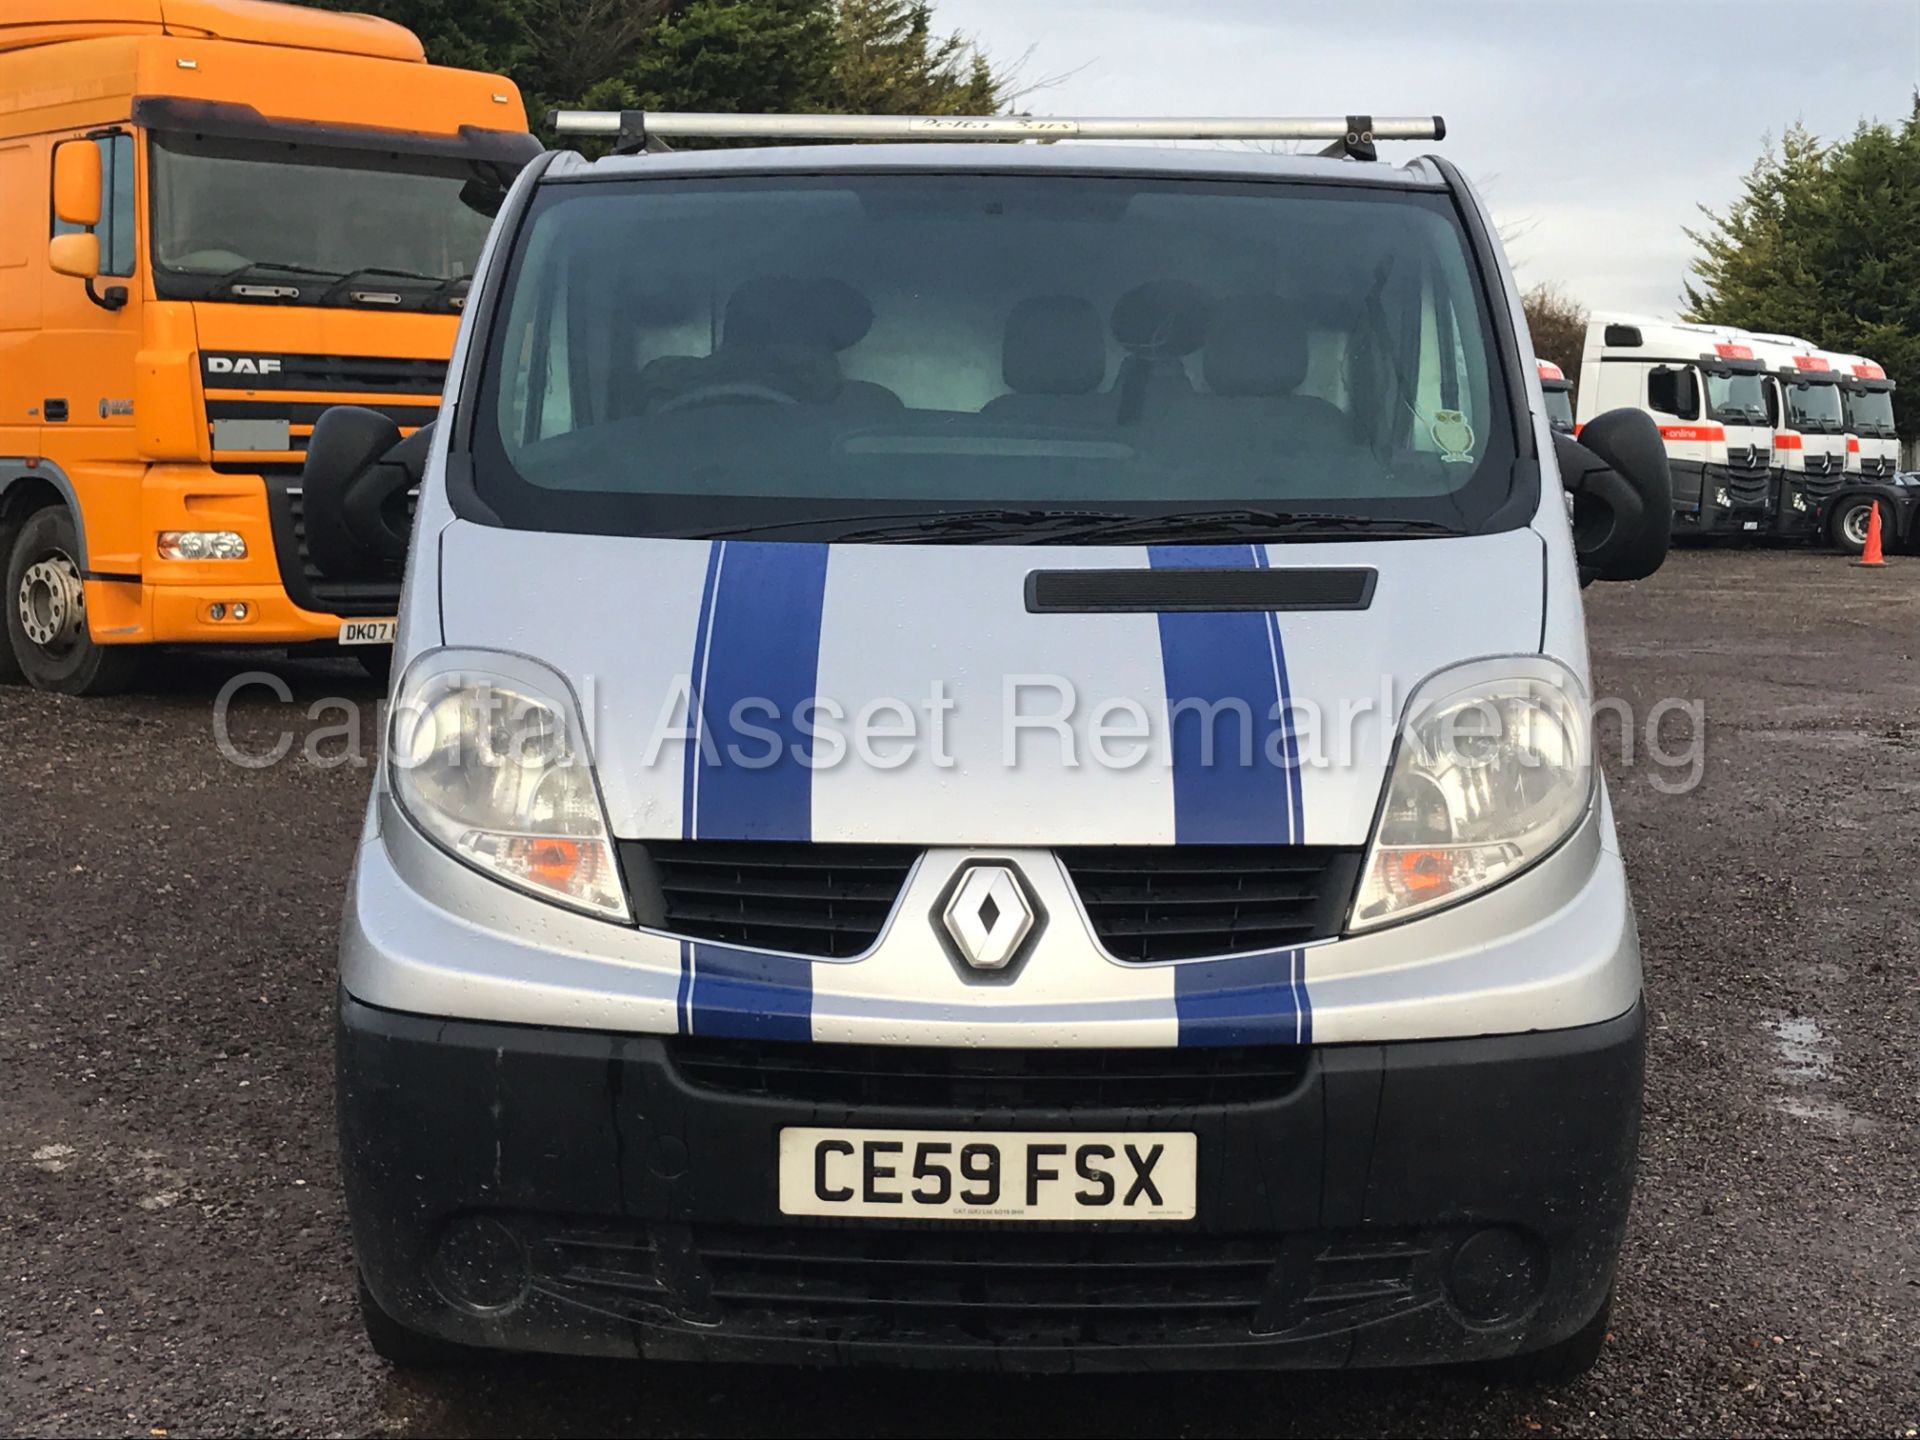 RENAULT TRAFIC LL29 DCI 115 (2010 MODEL) '2.0 DCI - 115 PS - 6 SPEED - LWB' **AIR CON** - Image 3 of 20